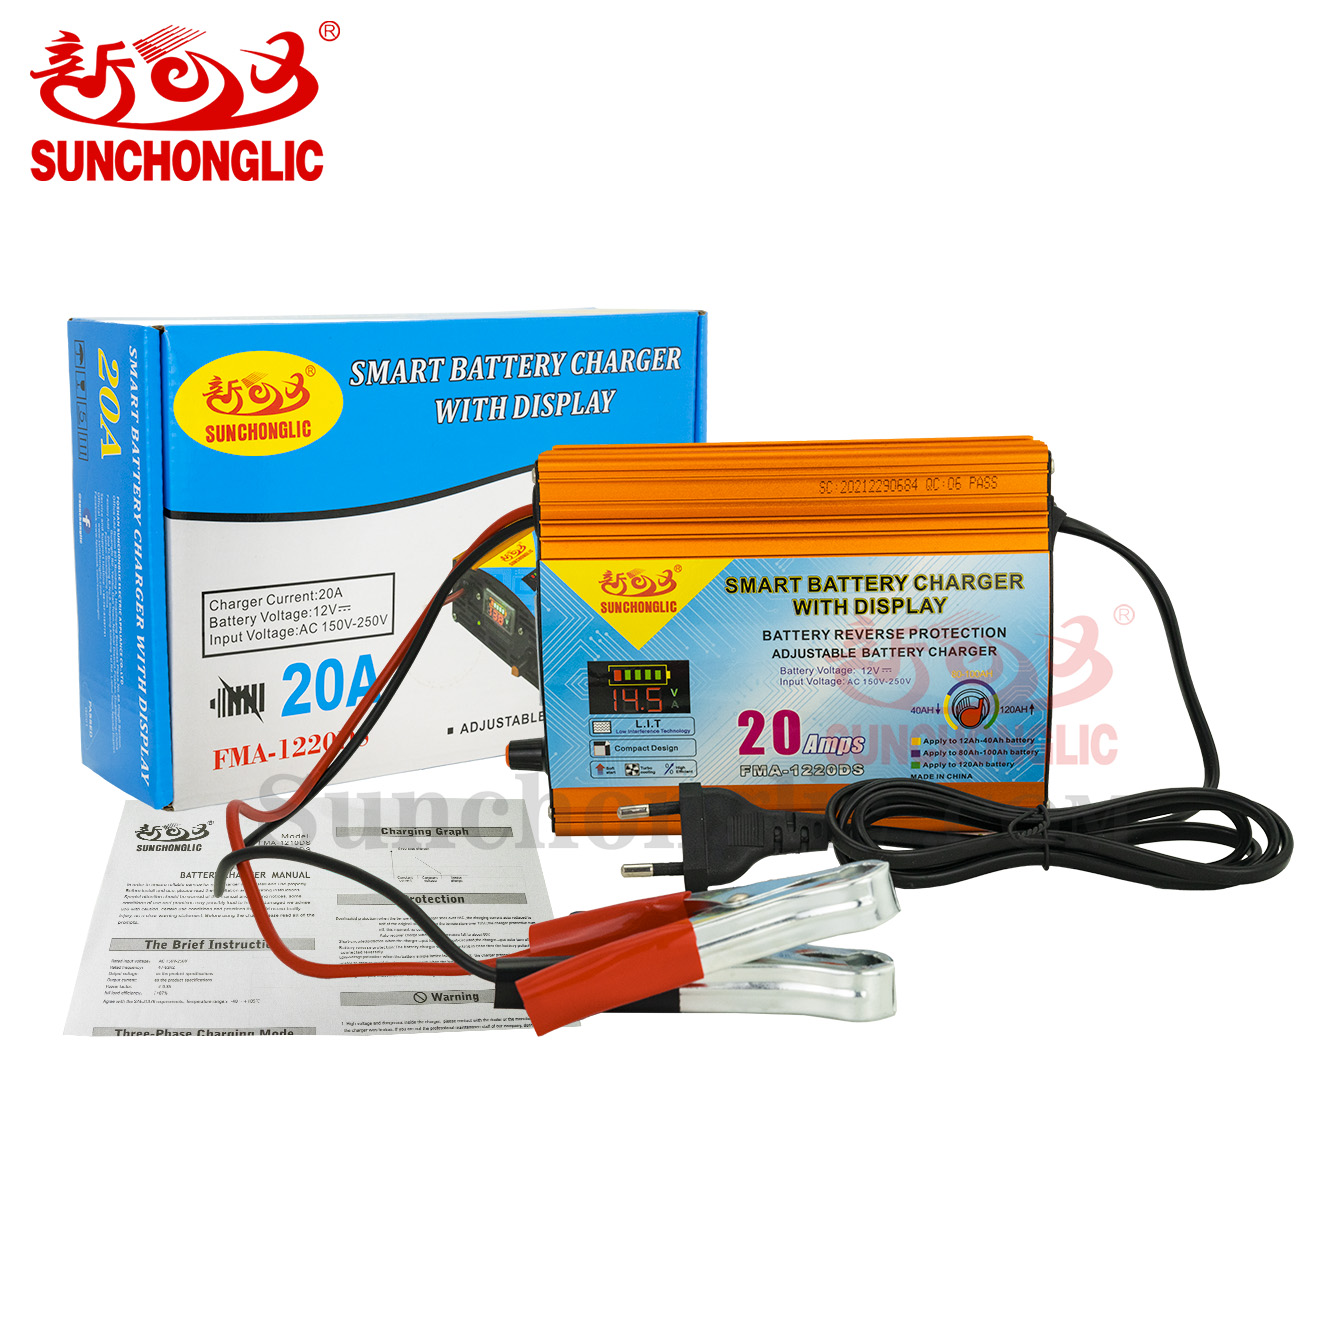 Sunchonglic 12V 20A 20 amp smart charger lead acid car battery charger with display